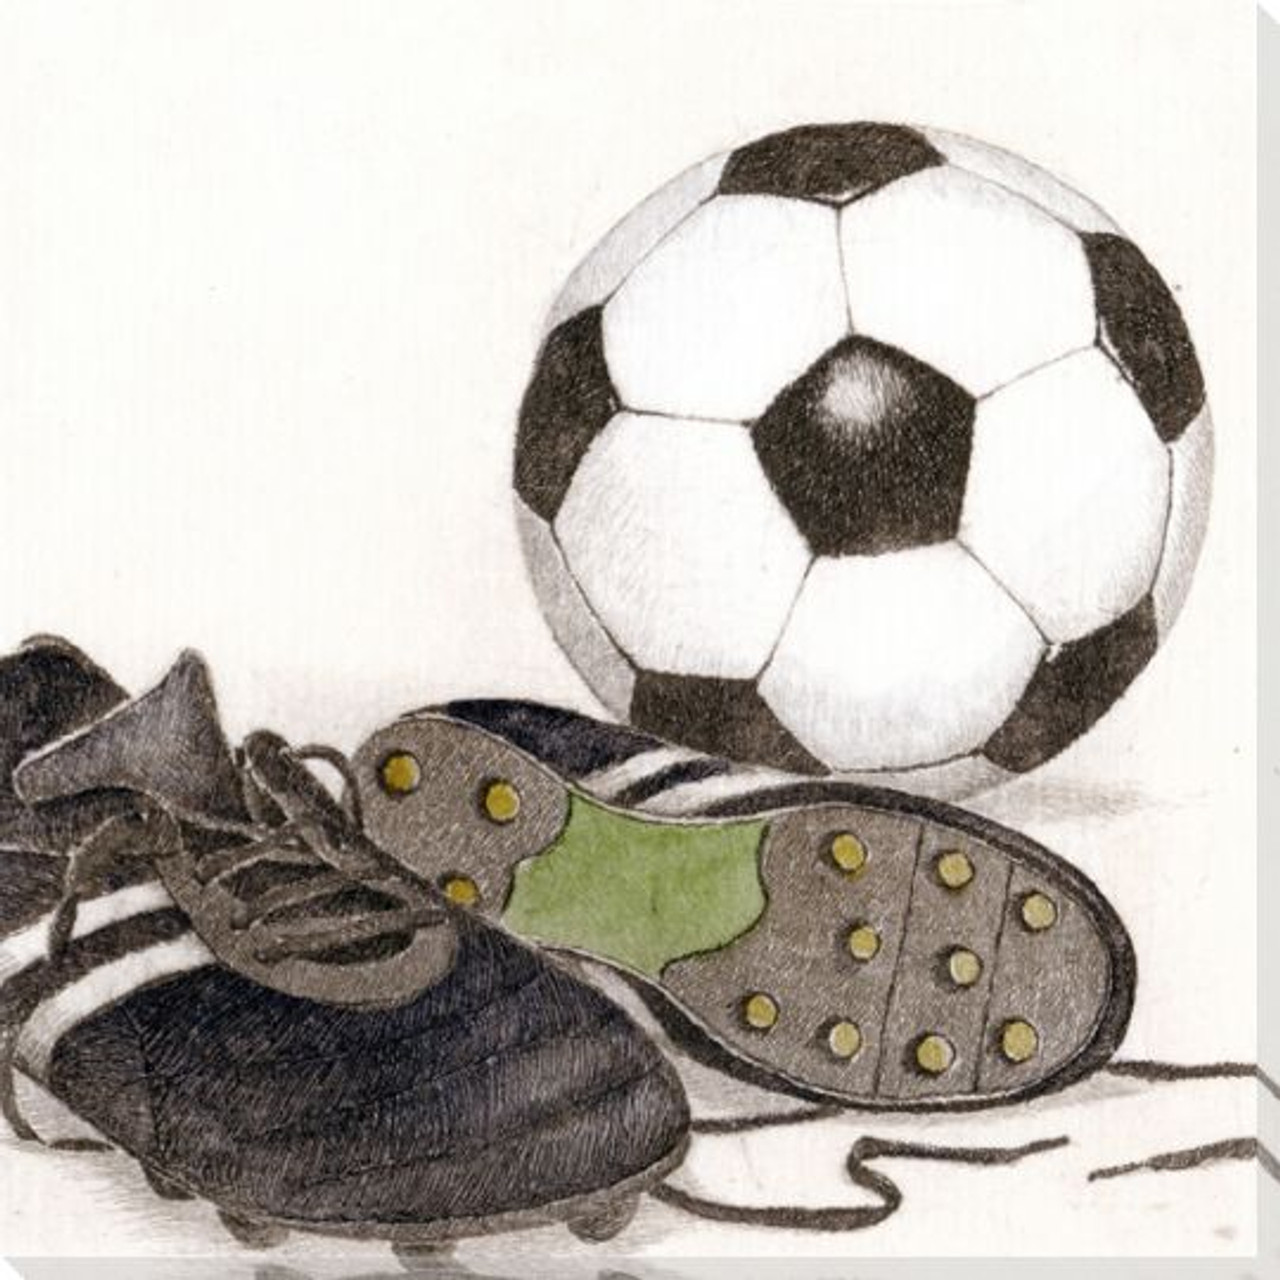 how to draw soccer stuff